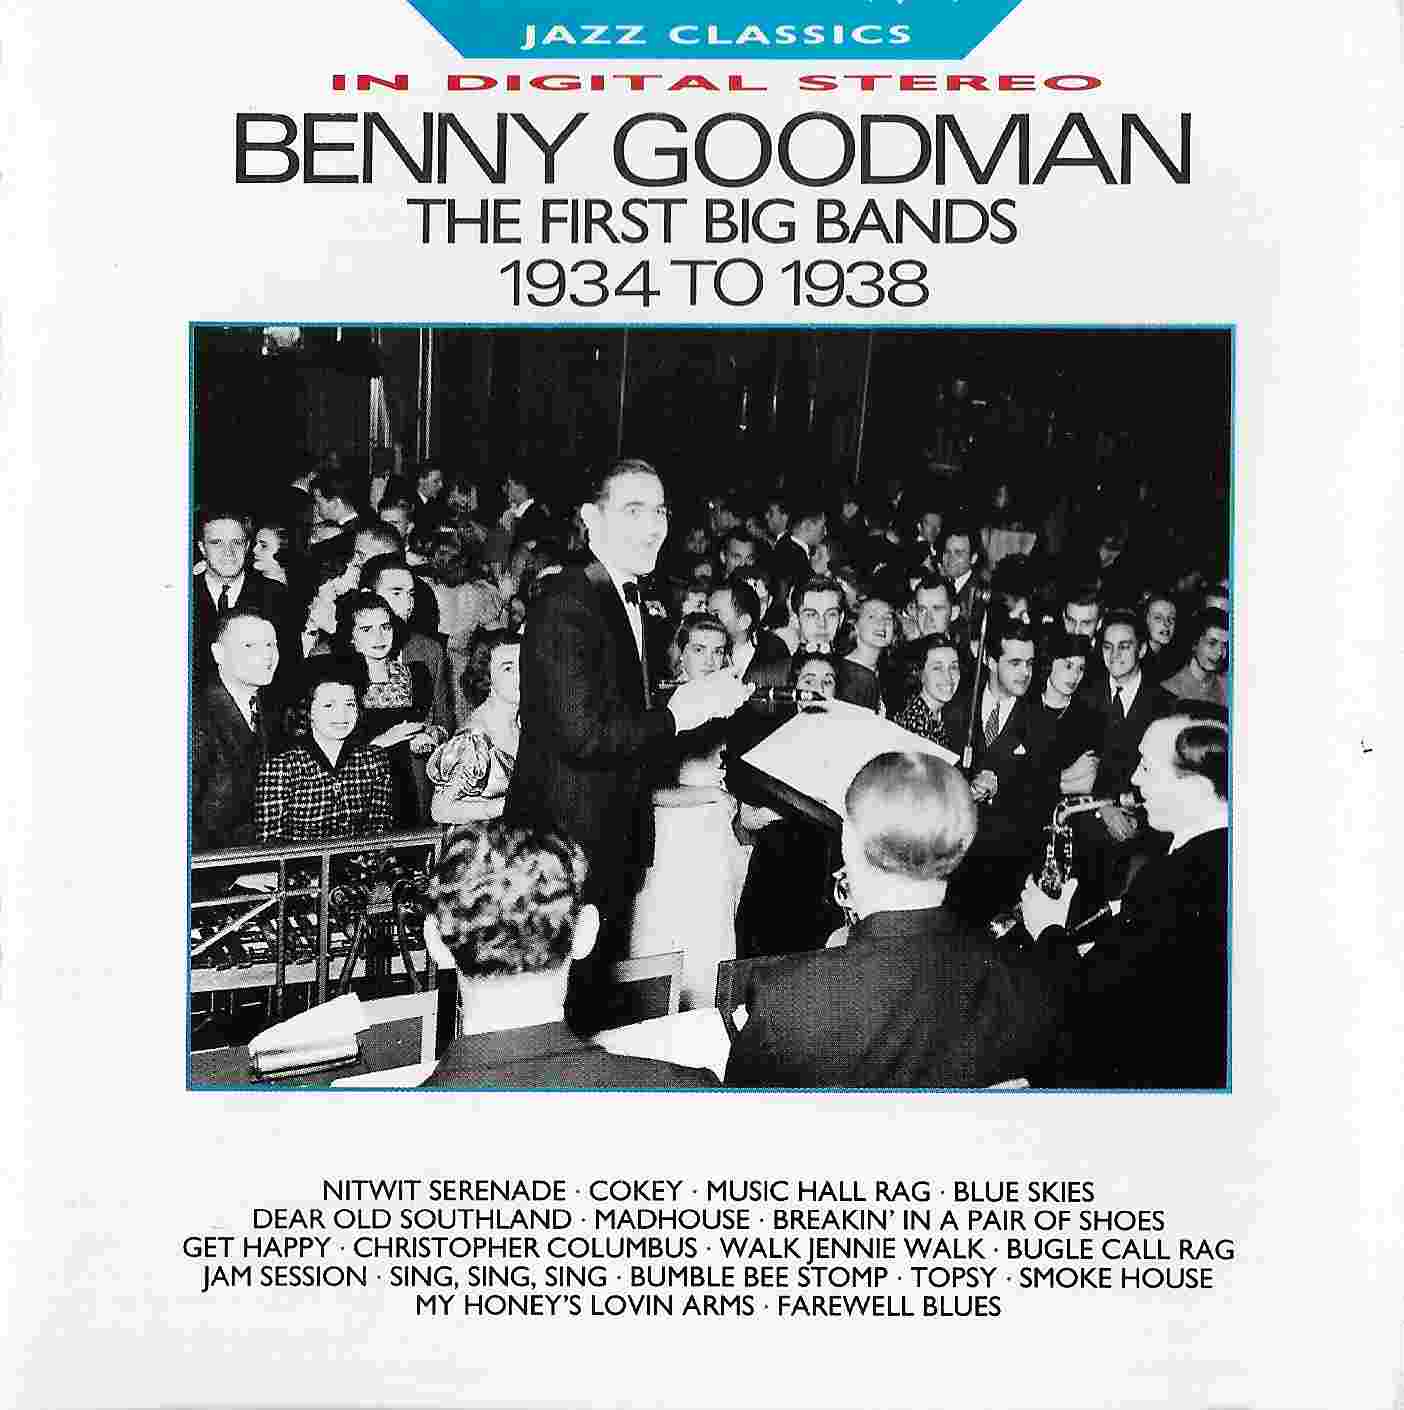 Picture of Jazz classics - Benny Goodman 1934 - 1938 by artist Benny Goodman  from the BBC cds - Records and Tapes library